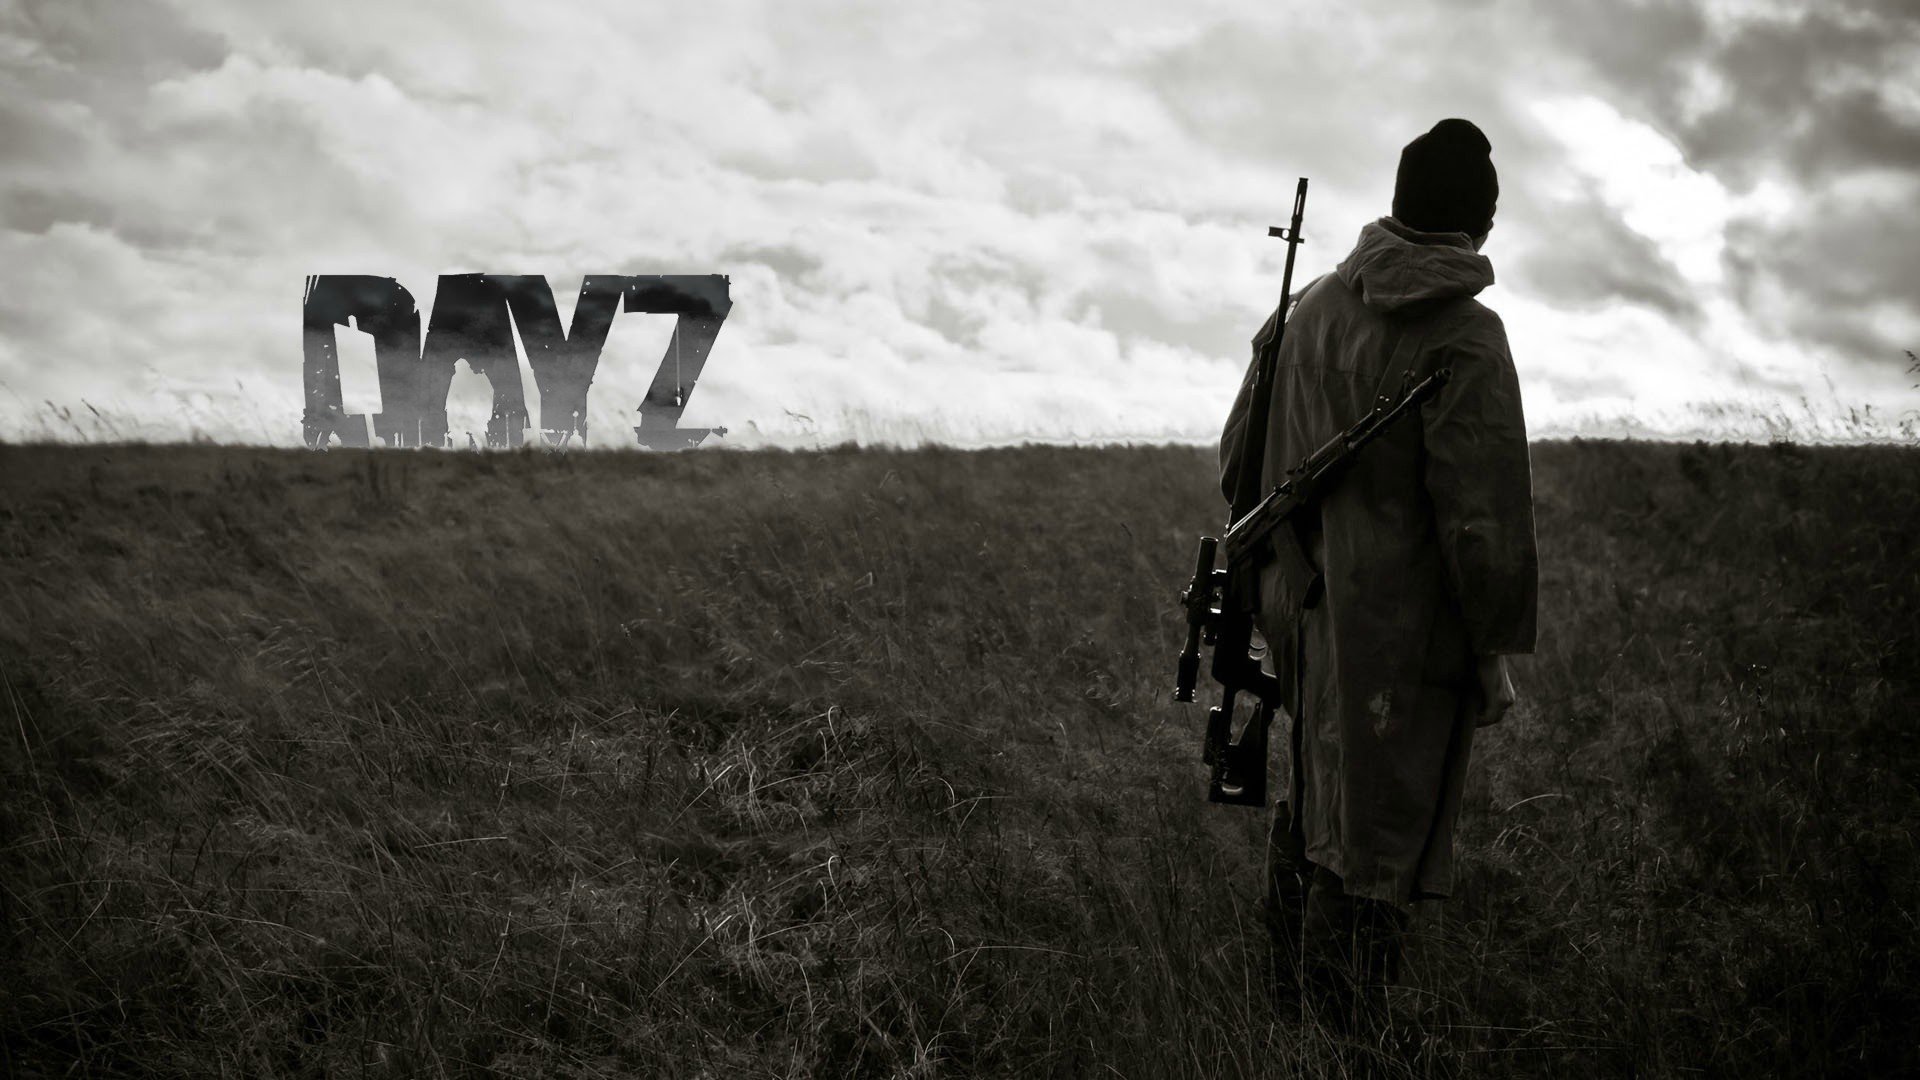 Dayz hd papers and backgrounds